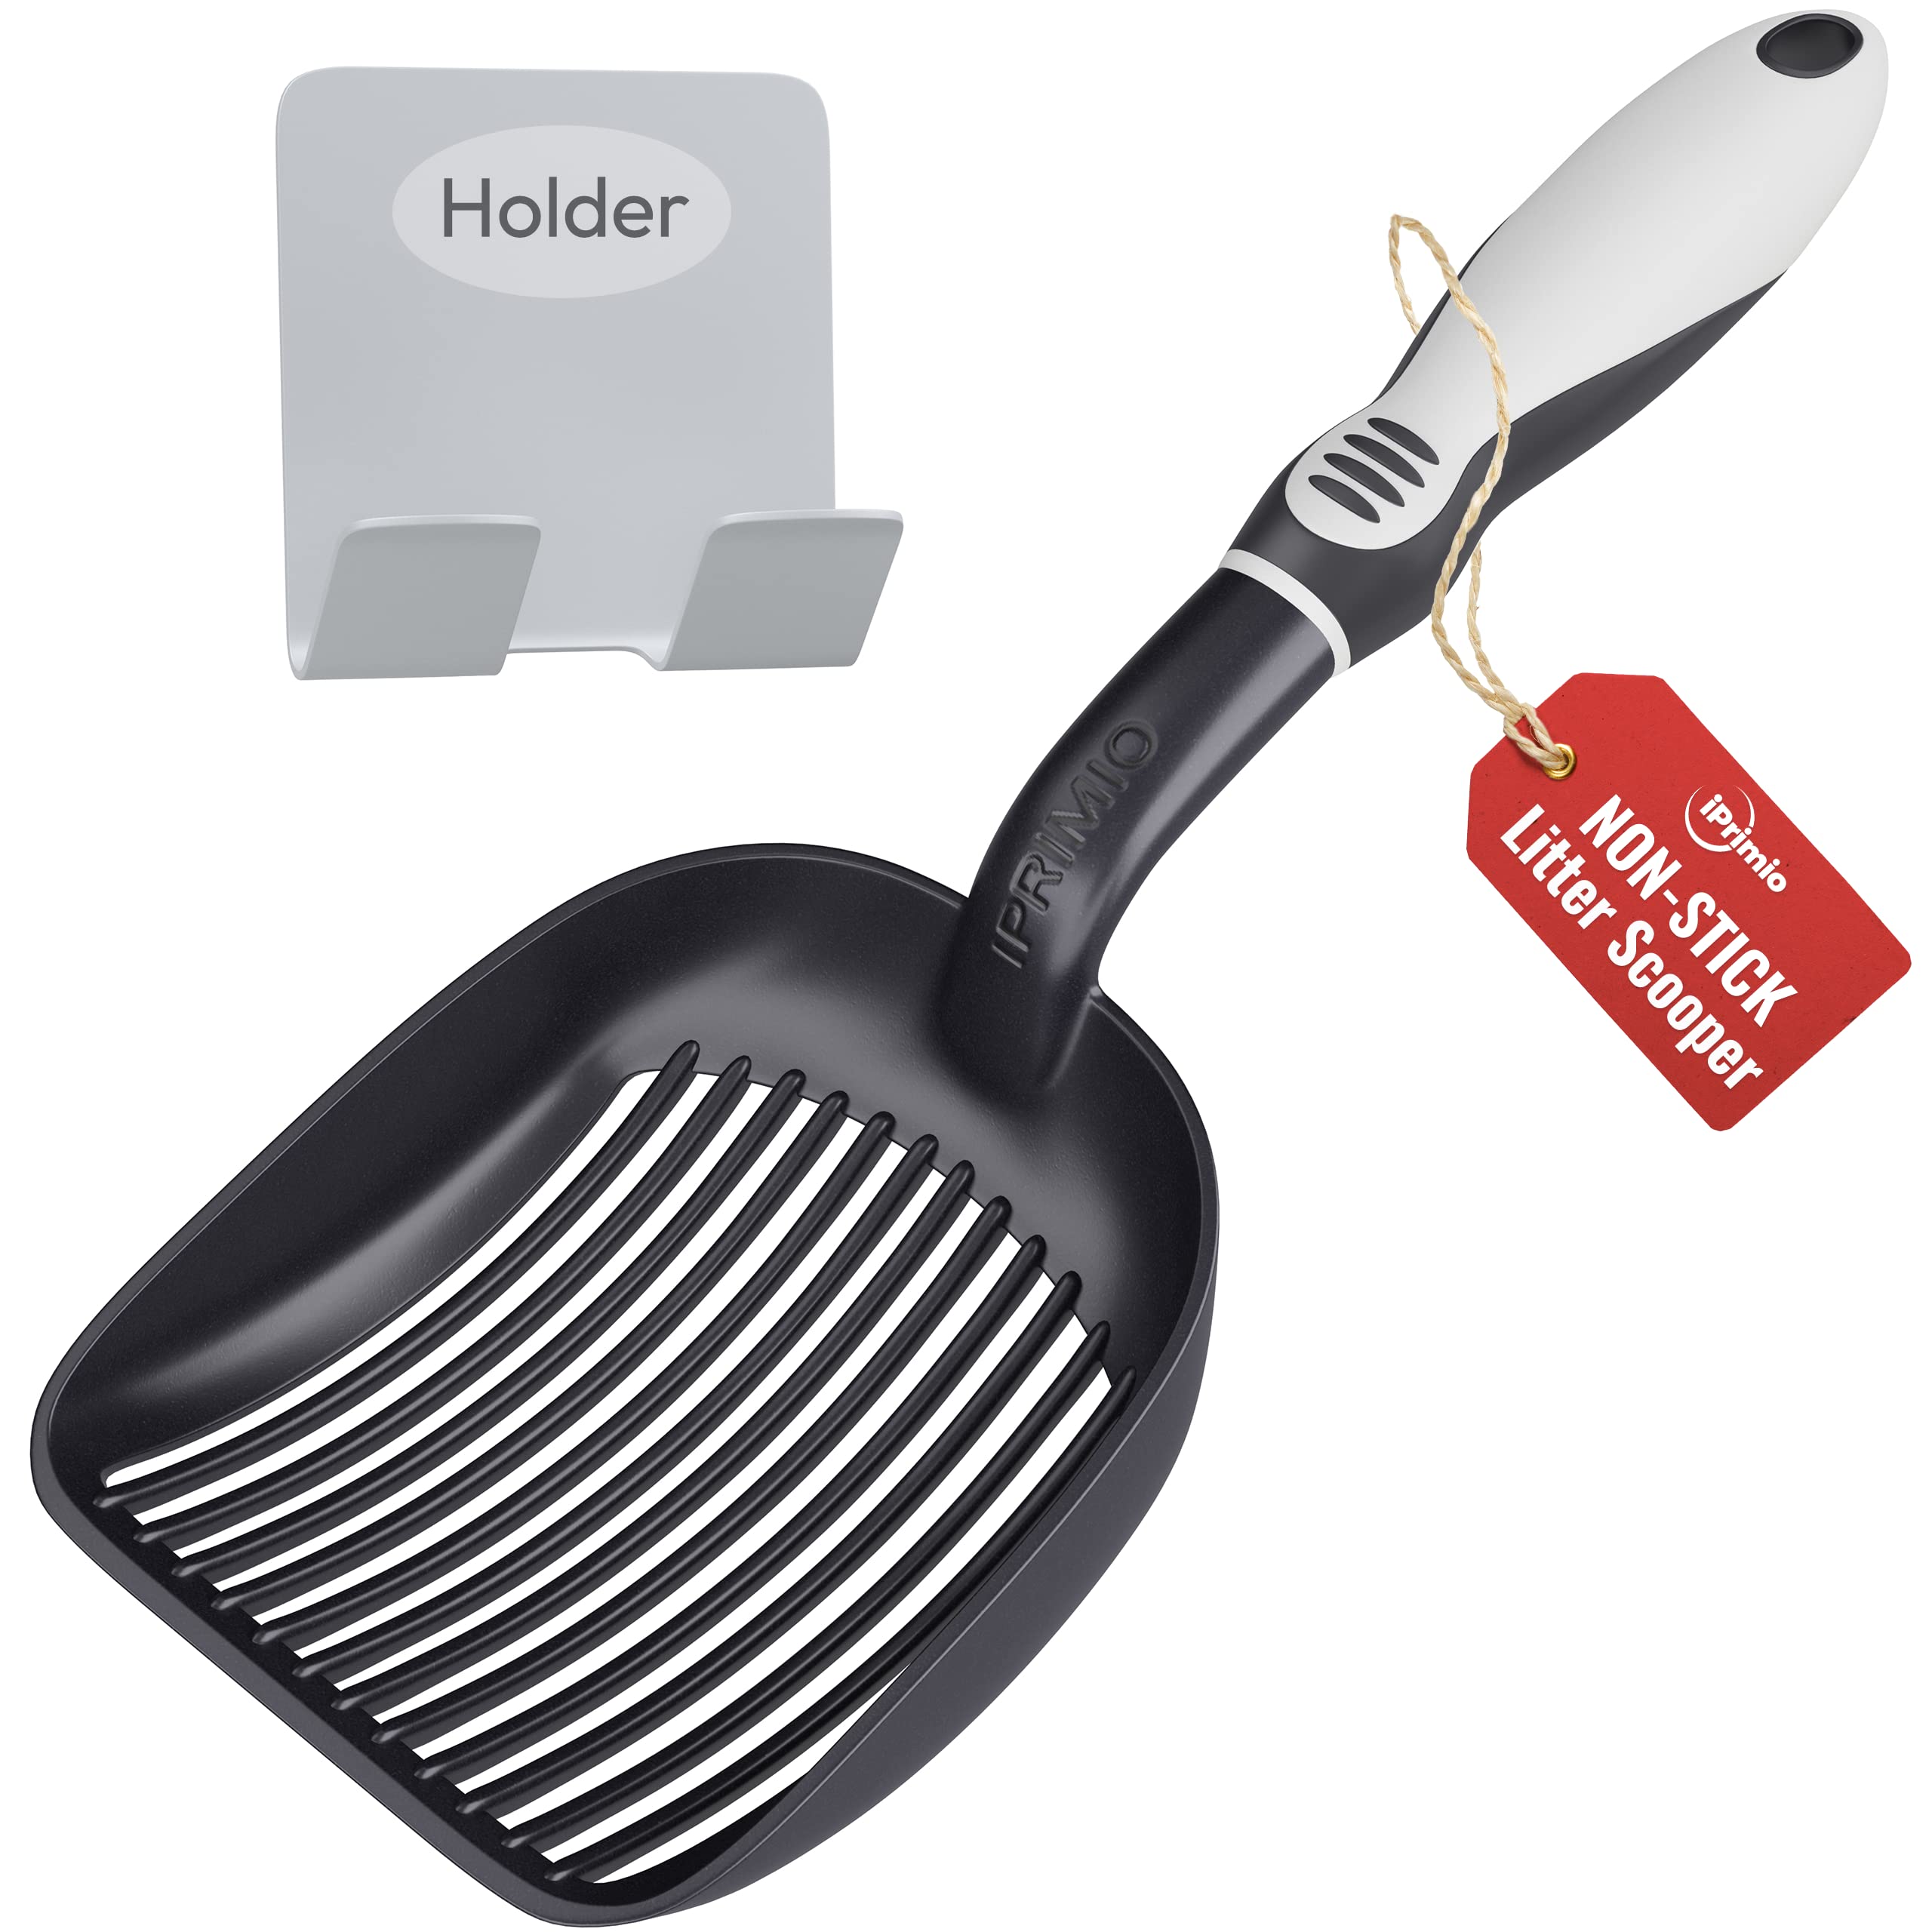 Book Cover iPrimio Cat Litter Scoop Metal with Deep Shovel - (Black) - Non Stick Plated Aluminum Cat Litter Scooper for Litter Box - Designed by Cat Owners - Patented Sifter with Holder - Super Solid Handle Rubber Handle Metal Scoop - Rubber Handle (Black)